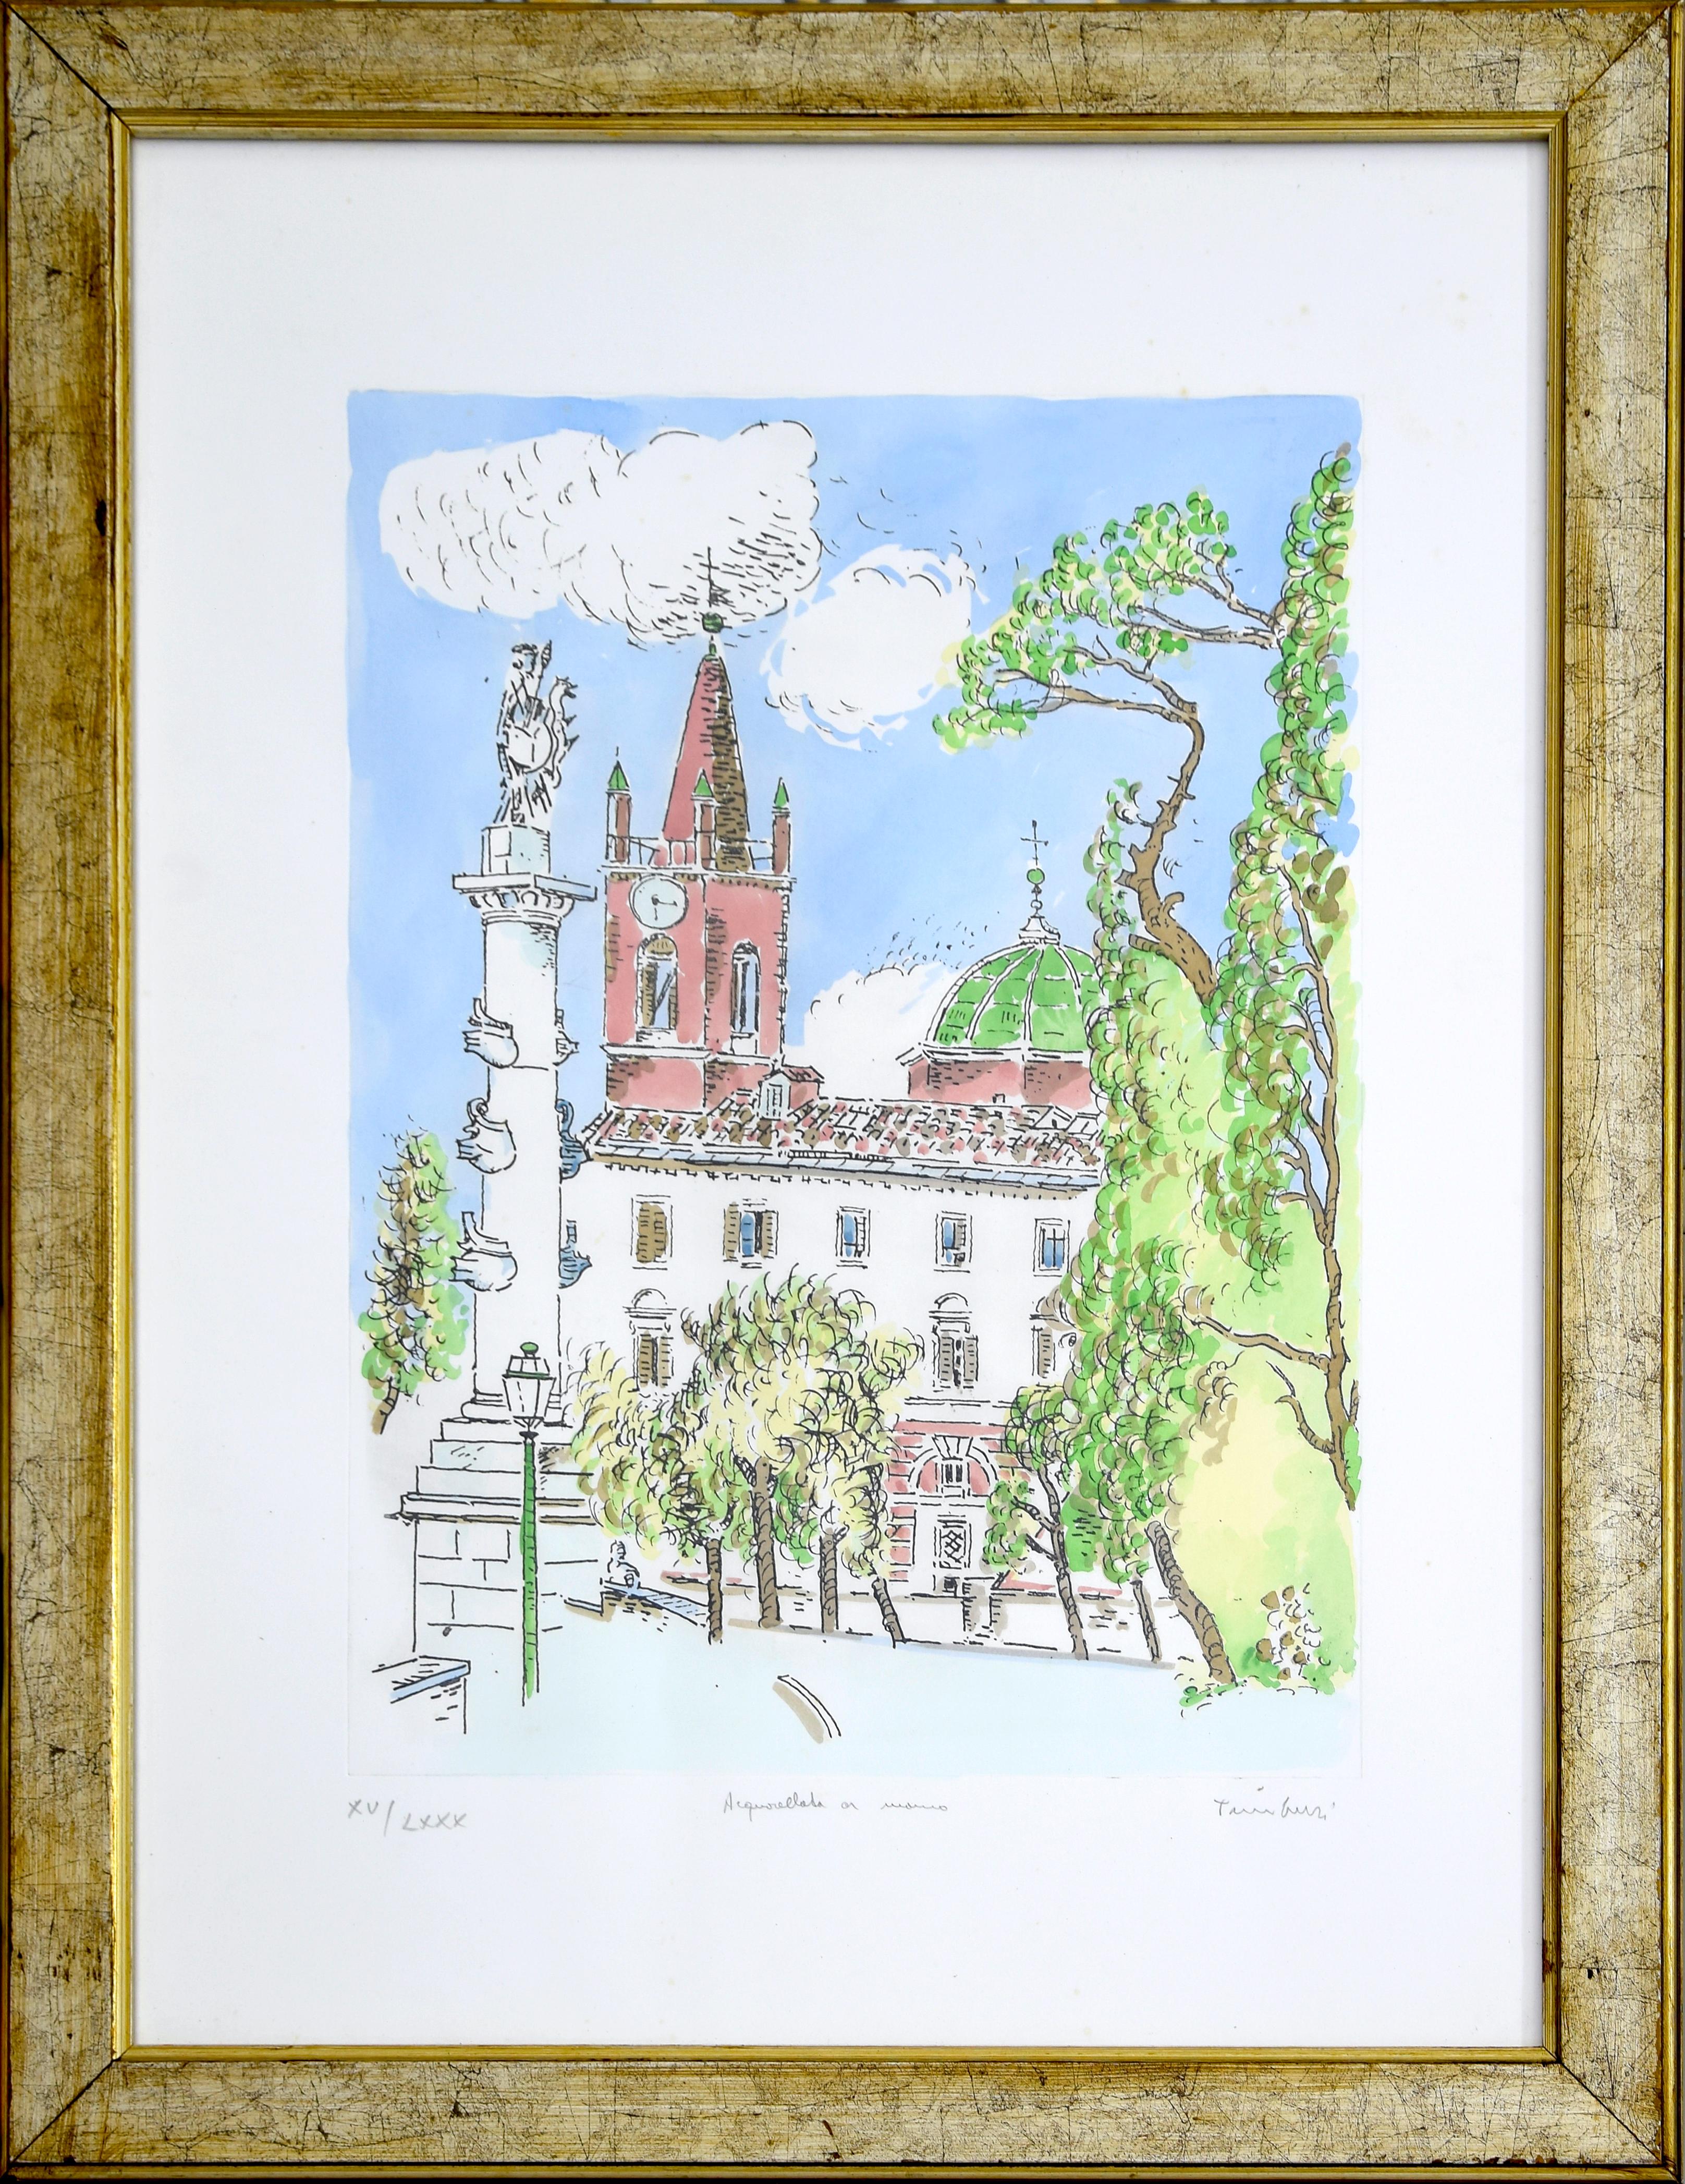 Cathedral is an original artwork realized by Orfeo Tamburi during the 1980s.

Hand-watercolored lithograph. Hand-signed and numbered by the artist on the lower margin. Specimen XV / LXXX.

Dimensions: cm 75 x 55. Frame not included. In very good